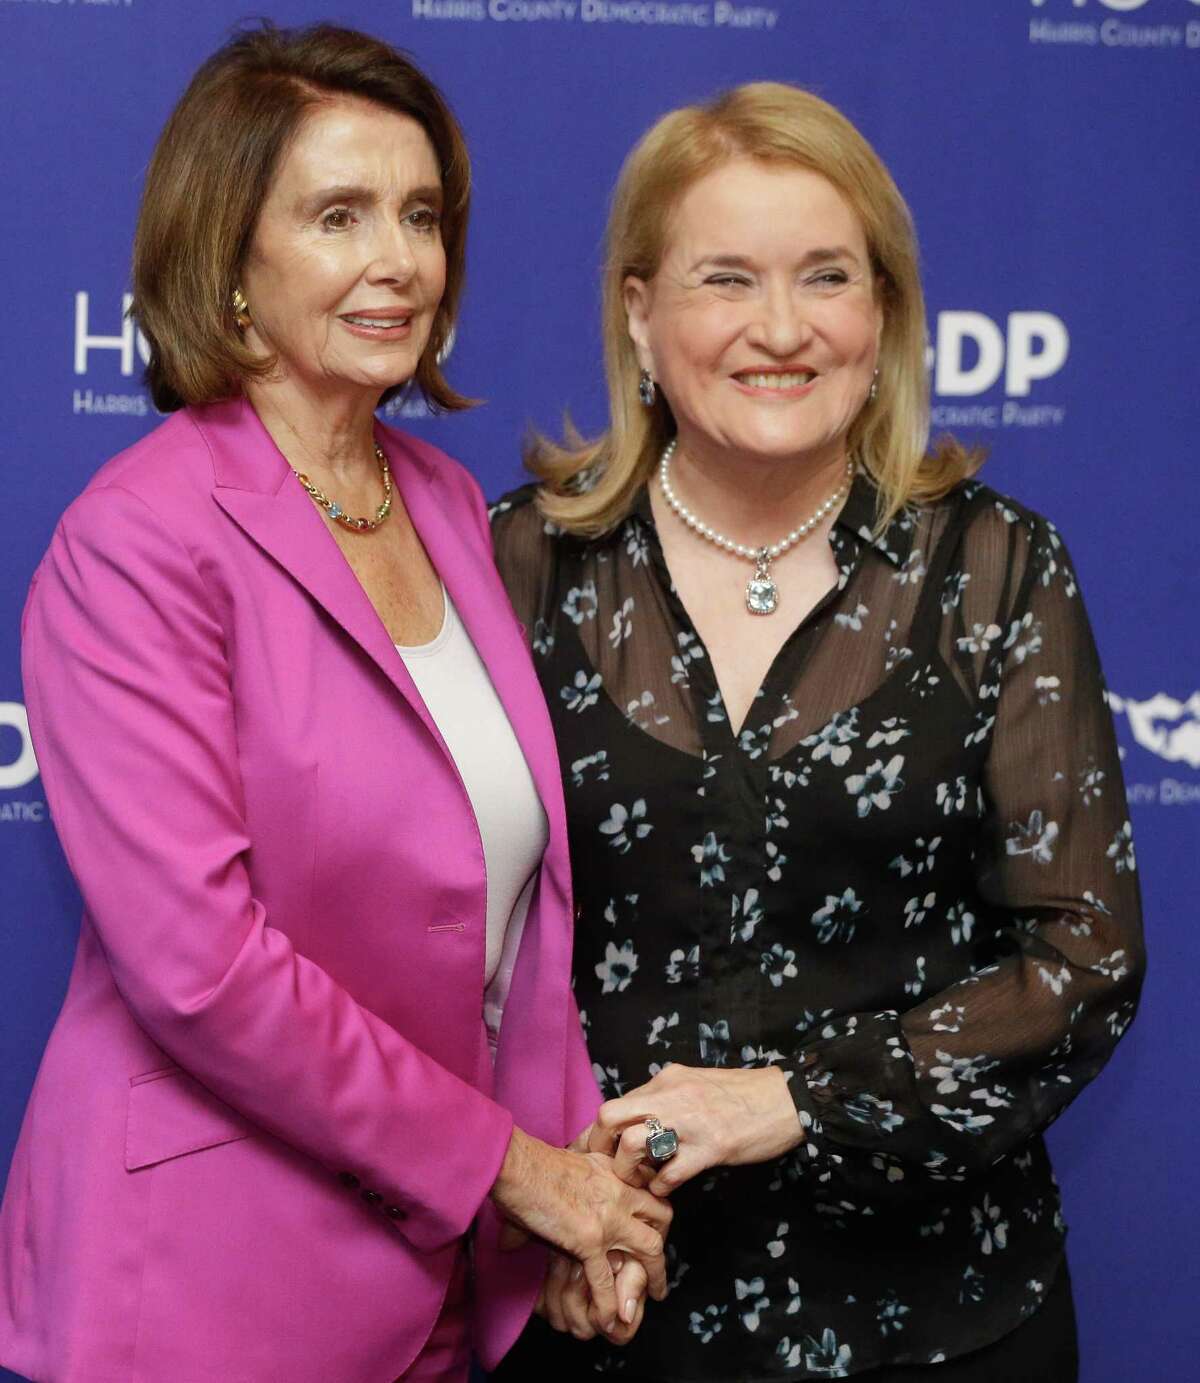 House Minority Leader Nancy Pelosi, left, Texas State Senator Sylvia Garcia, right, pose for photos at the Harris County Democratic Party fundraiser at the Marriott Marquis Houston, 1777 Walker Street, Friday, Feb. 16, 2017. Pelosi is the keynote speaker at the event.